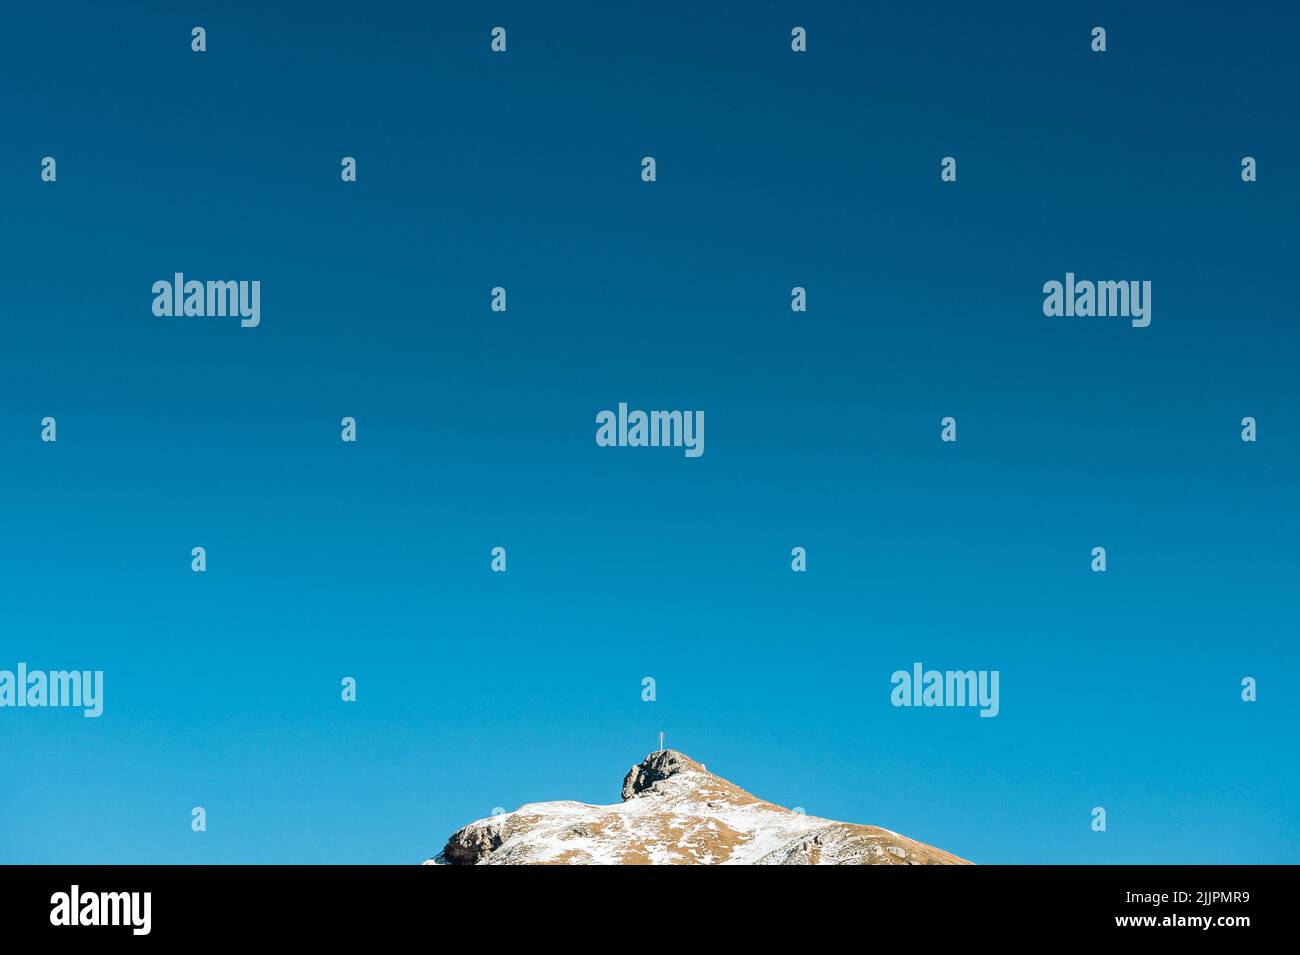 The clear sky with gradient blue effect and a summit peeking below Stock Photo